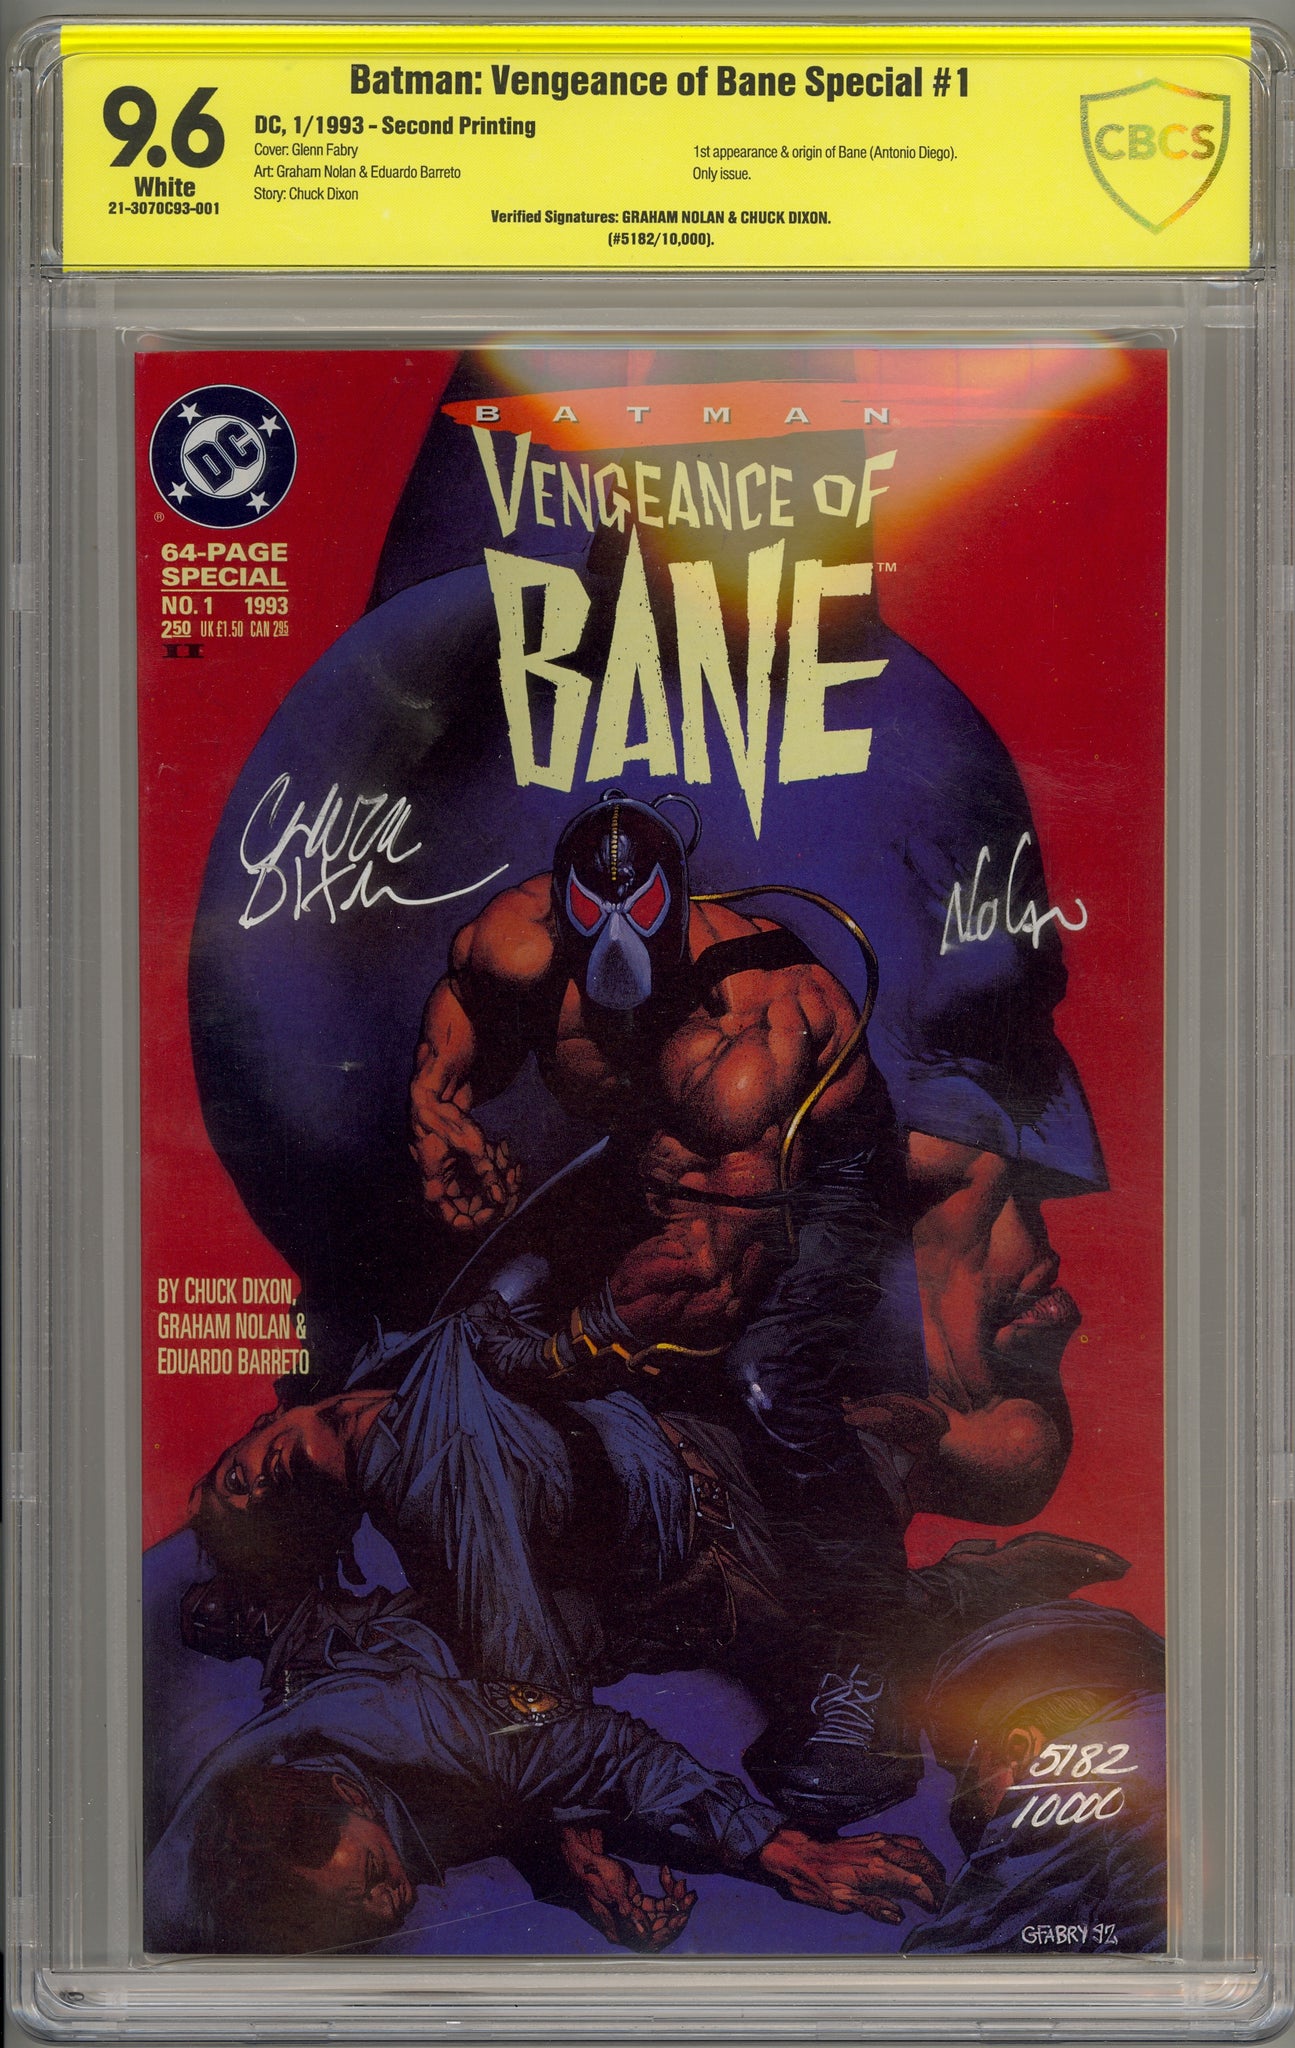 Batman:  Vengeance of Bane Special #1 (1993) 2nd printing, verified signature